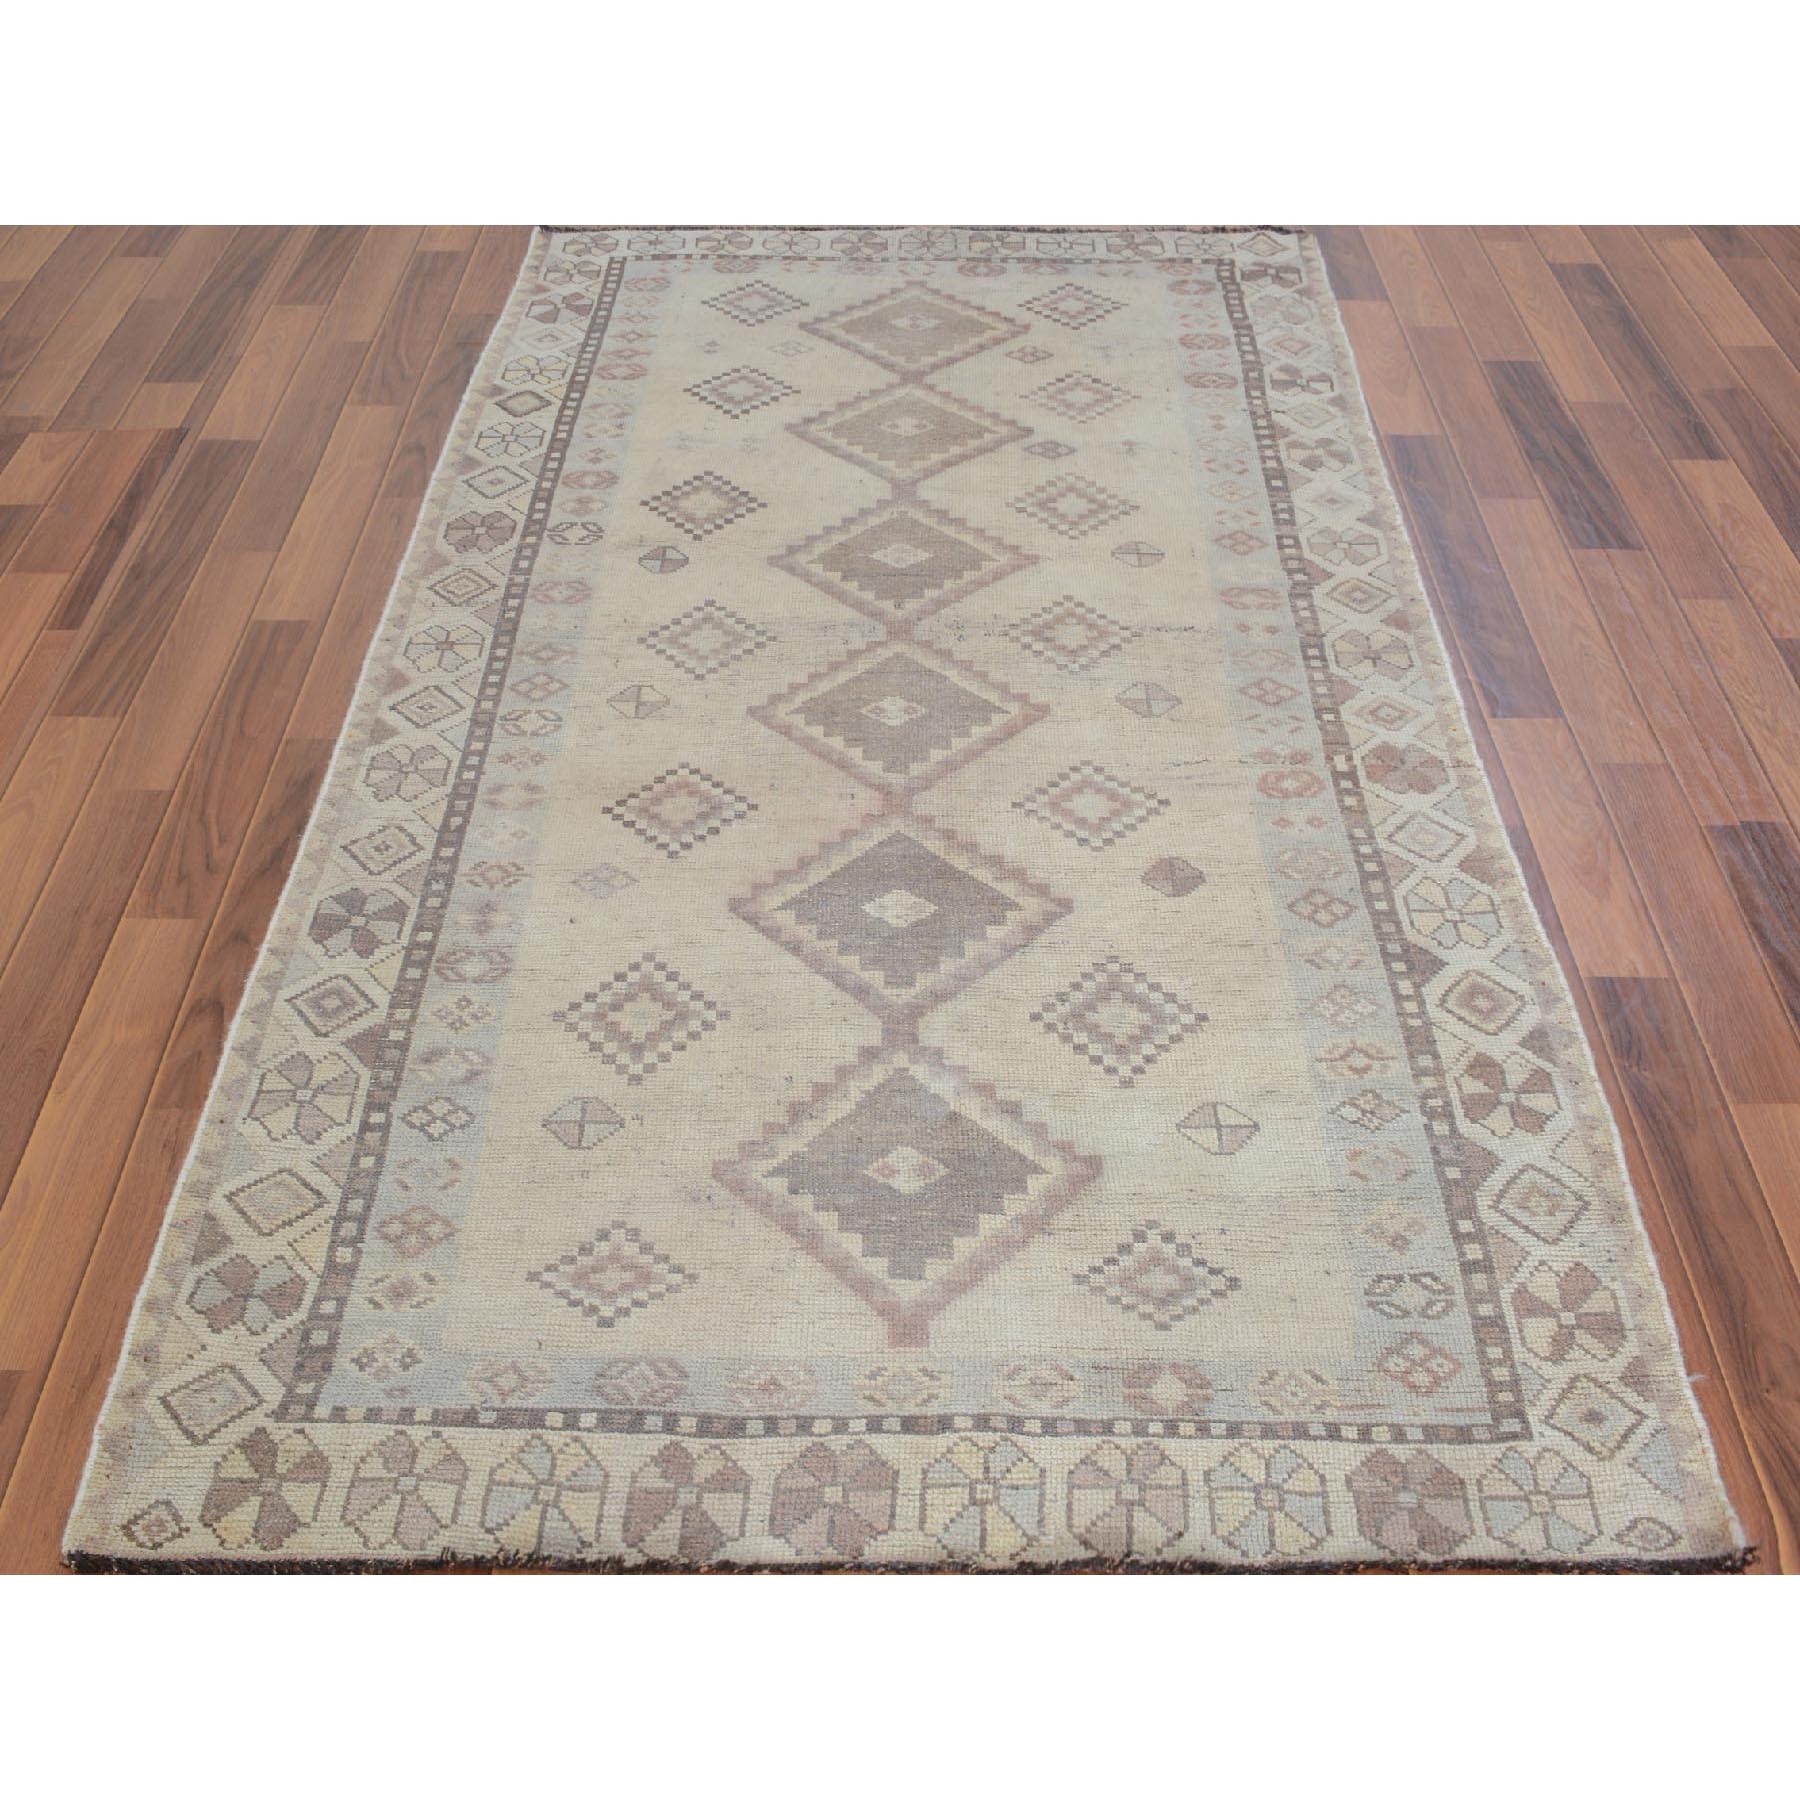 4-x7-10  Distressed Colors Vintage And Worn Down Persian Shiraz Wide Runner Pure Wool Bohemian Rug 